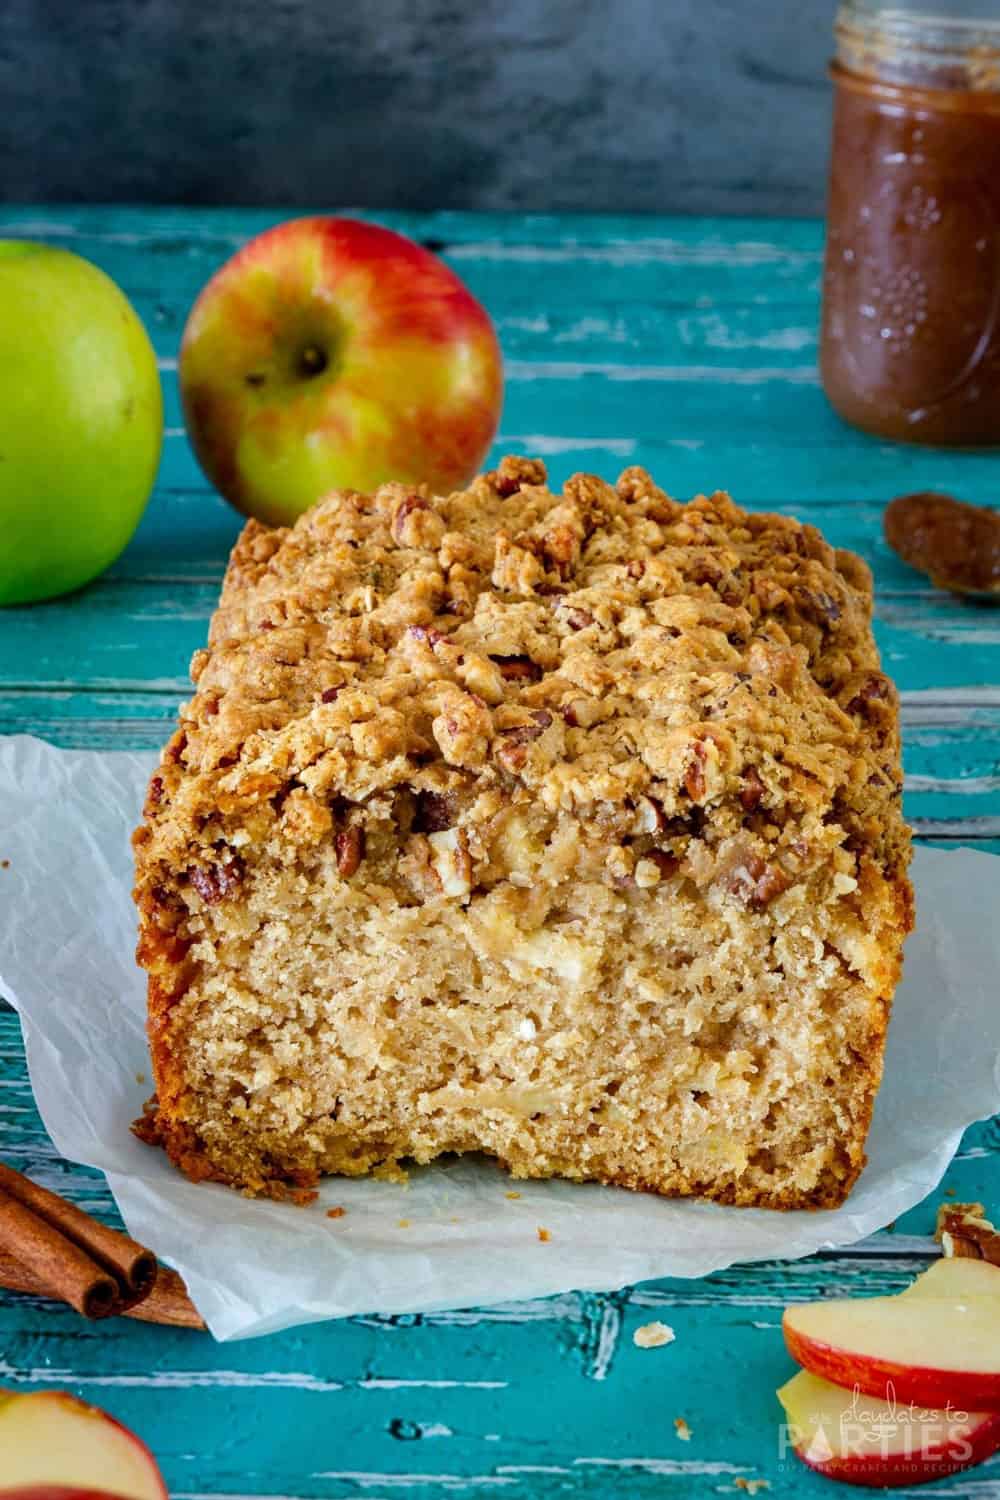 A look at the inside of a loaf of quick bread with visible apple chunks and streusel topping.